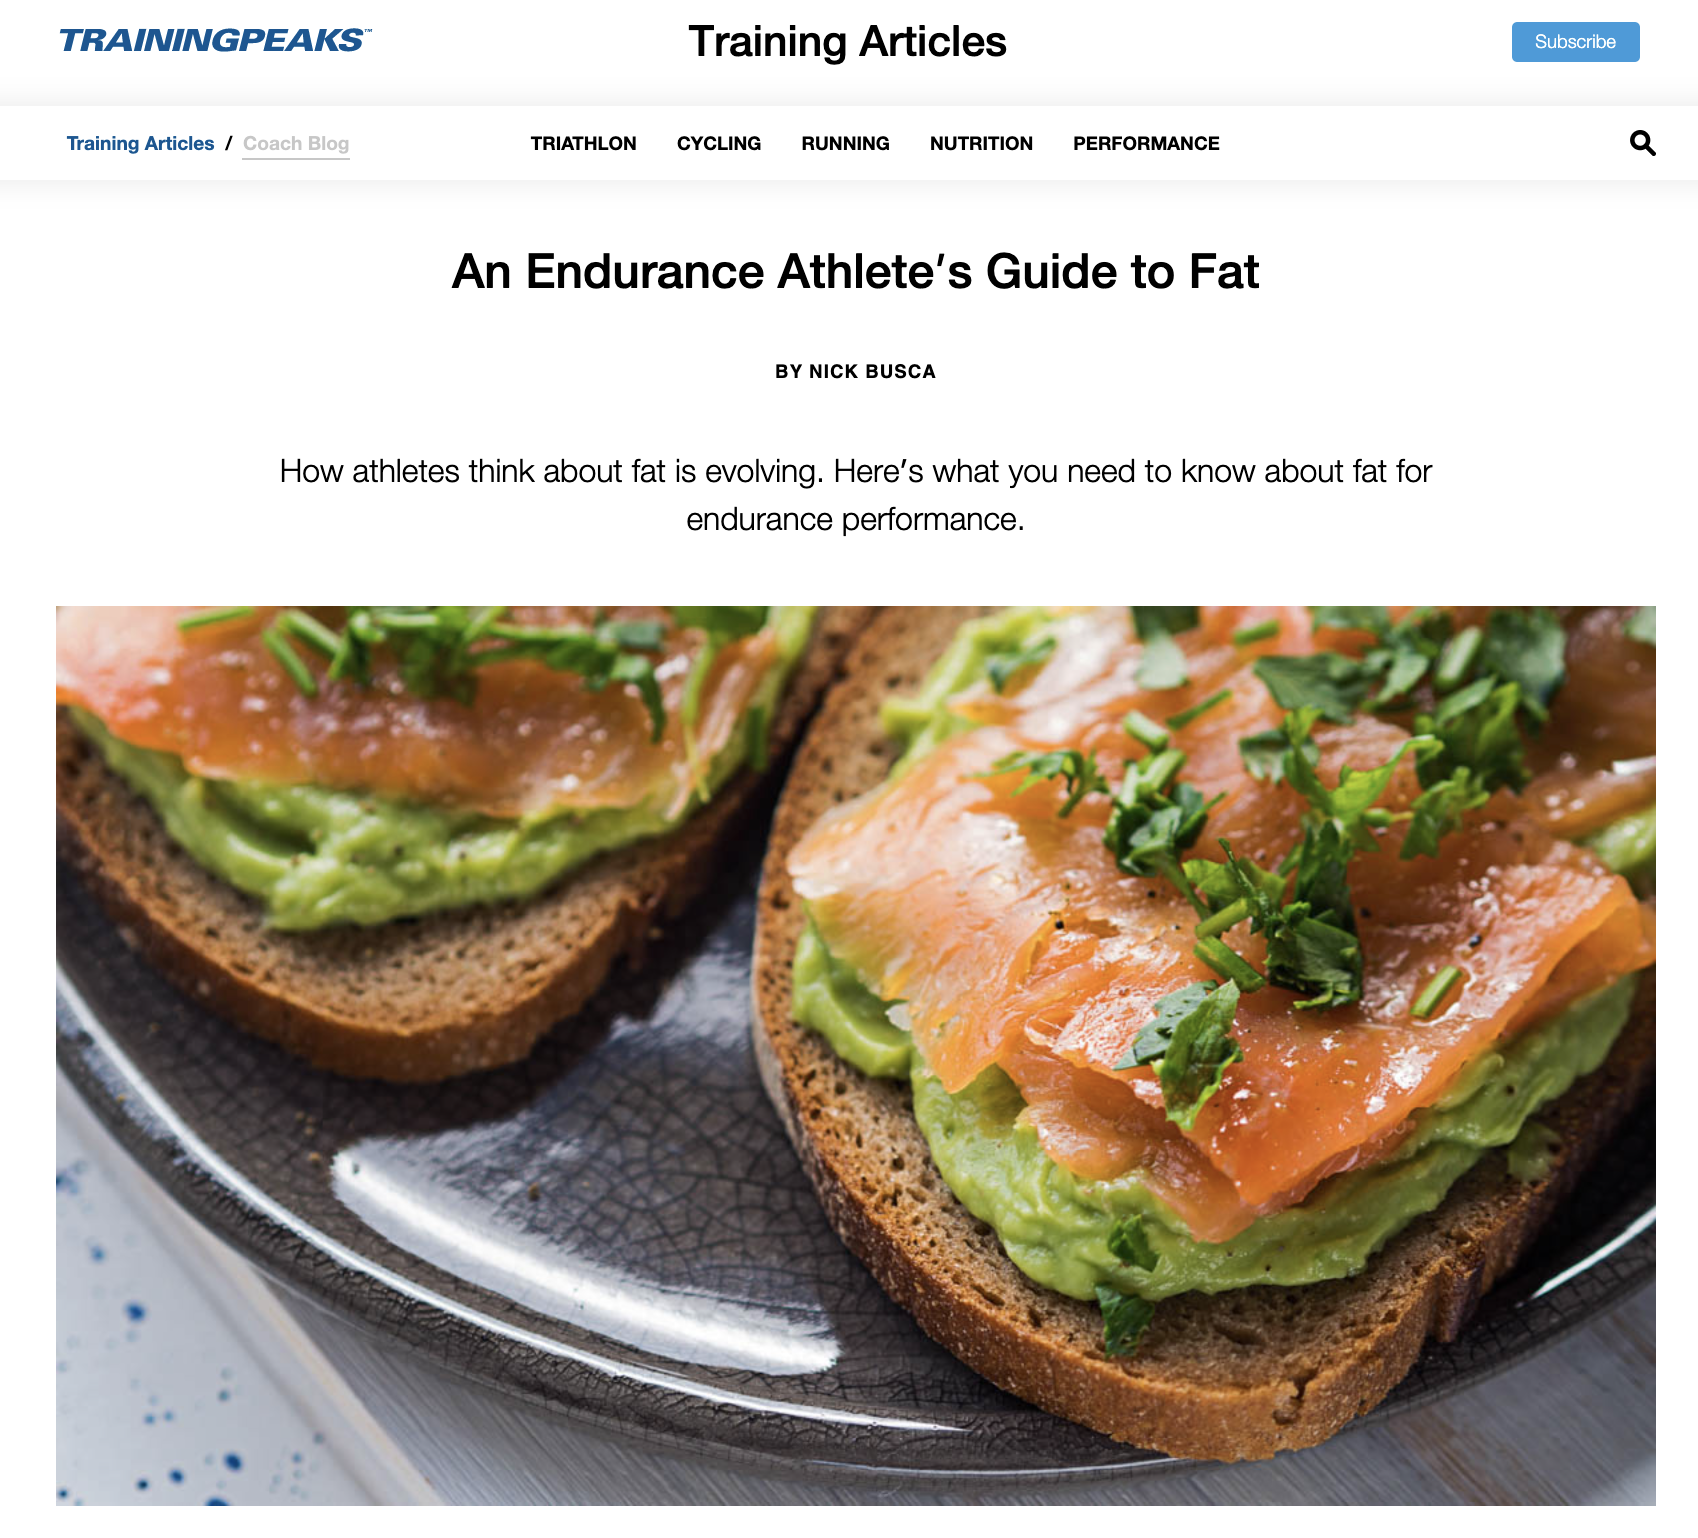 An Endurance Athlete’s Guide to Fat